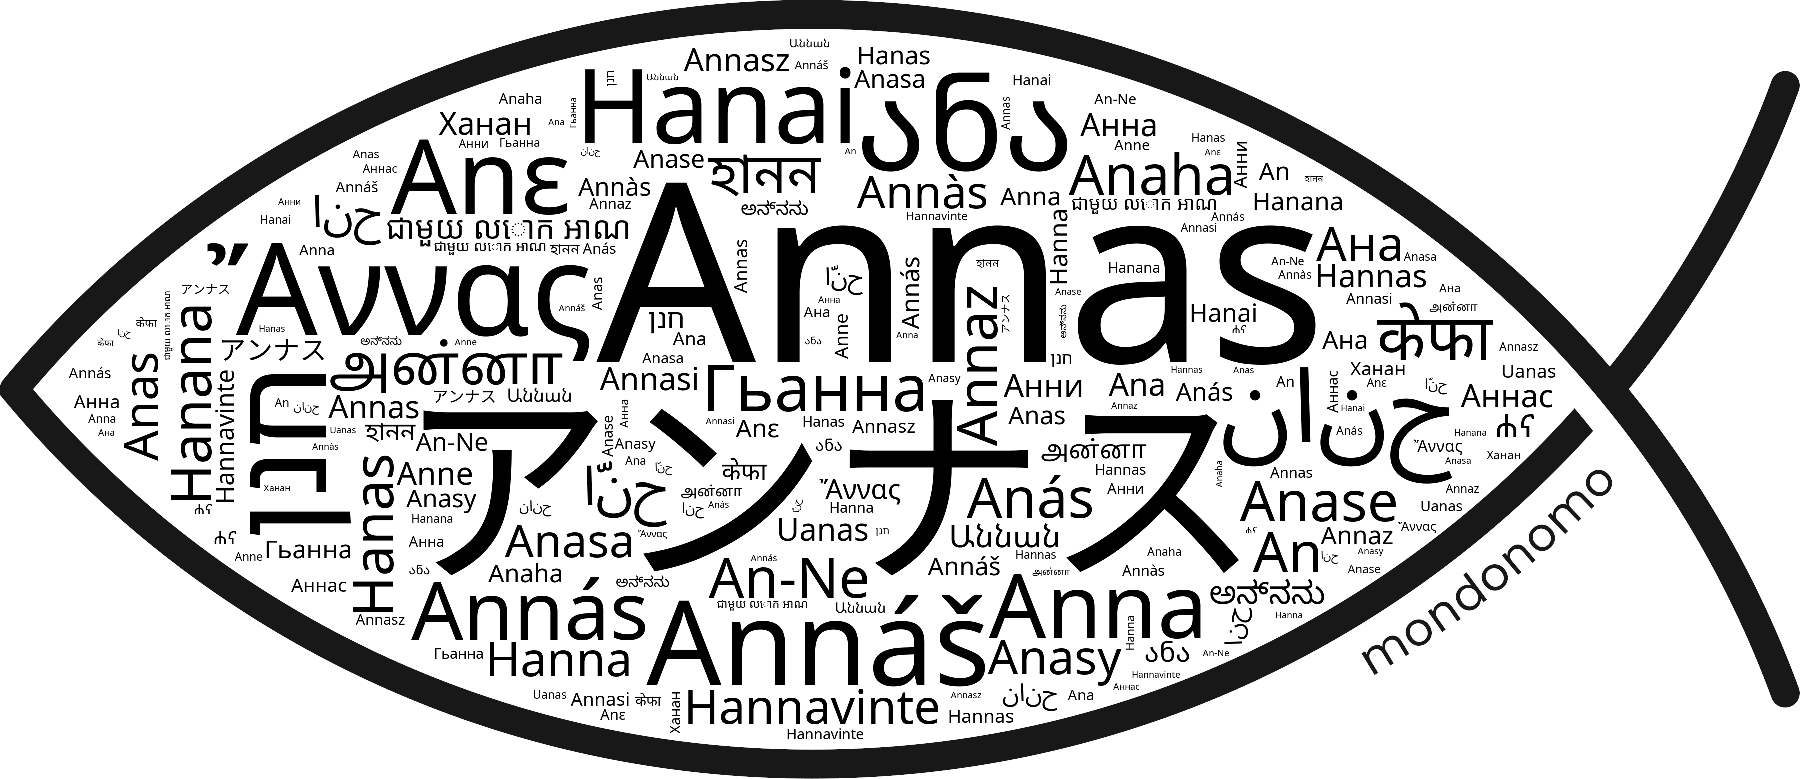 Name Annas in the world's Bibles